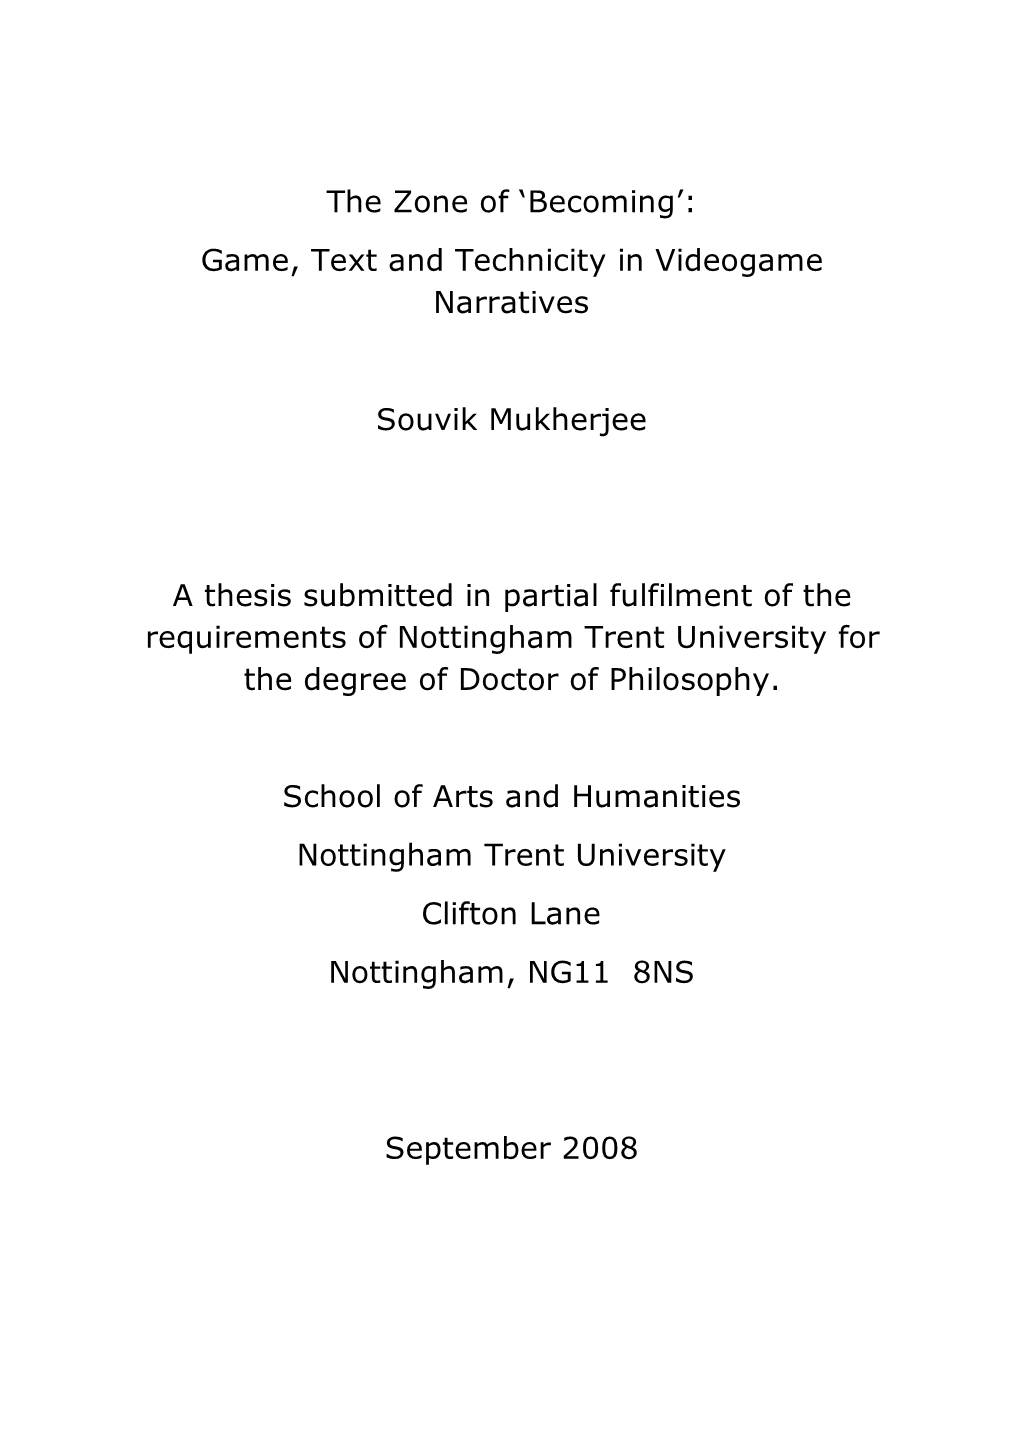 The Zone of 'Becoming': Game, Text and Technicity in Videogame